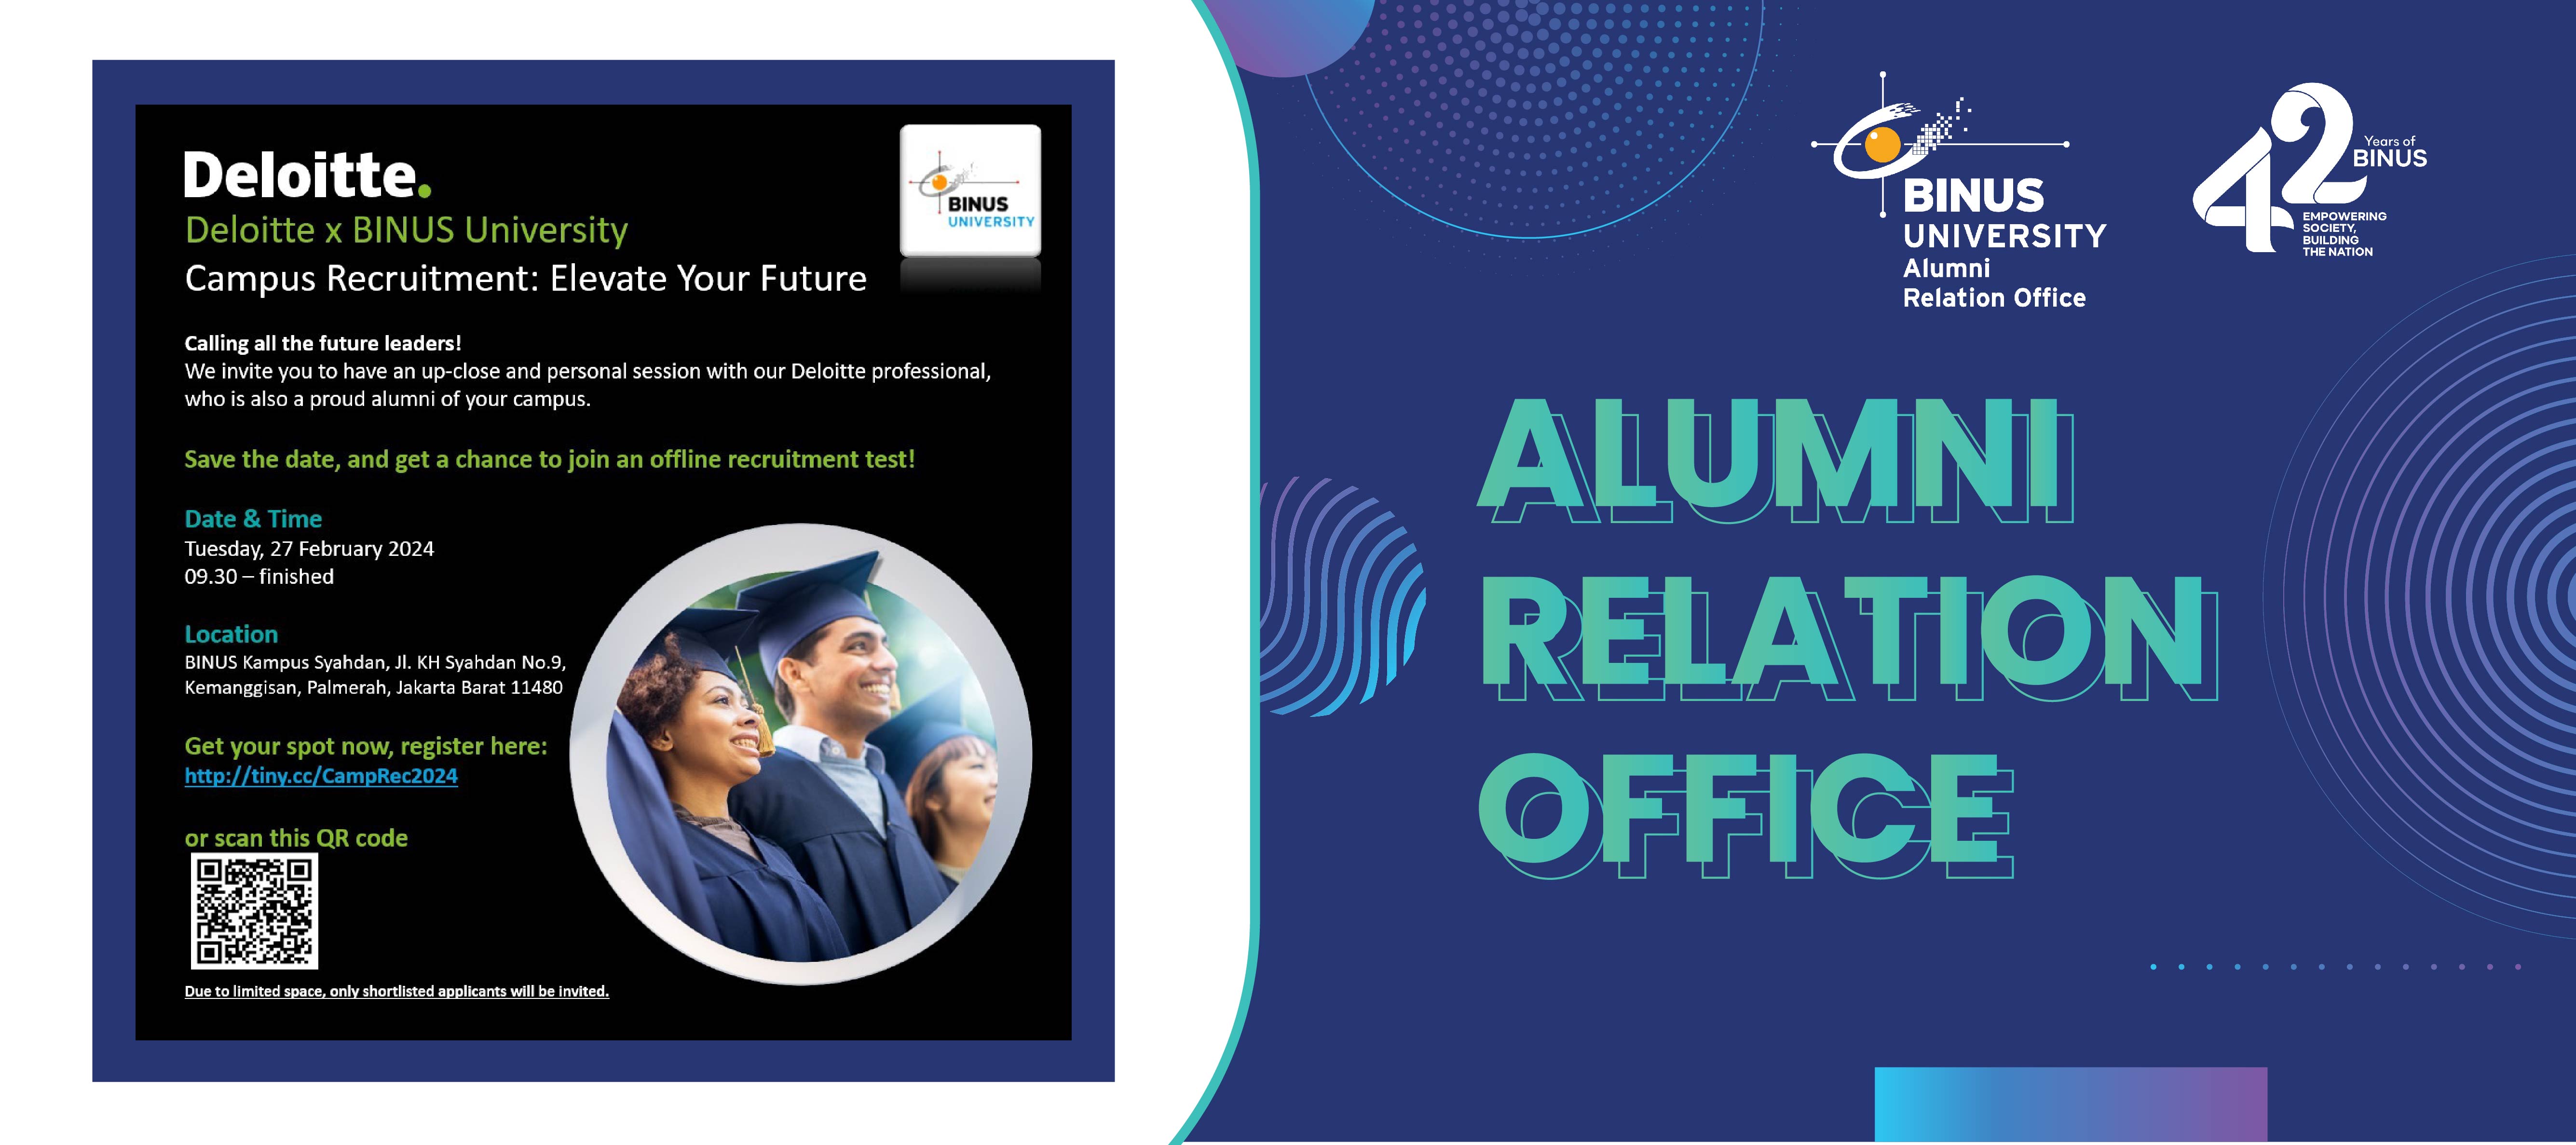 Are your ready to elevate your career journey with Deloitte Campus Recruitment 2024 at BINUS Univers